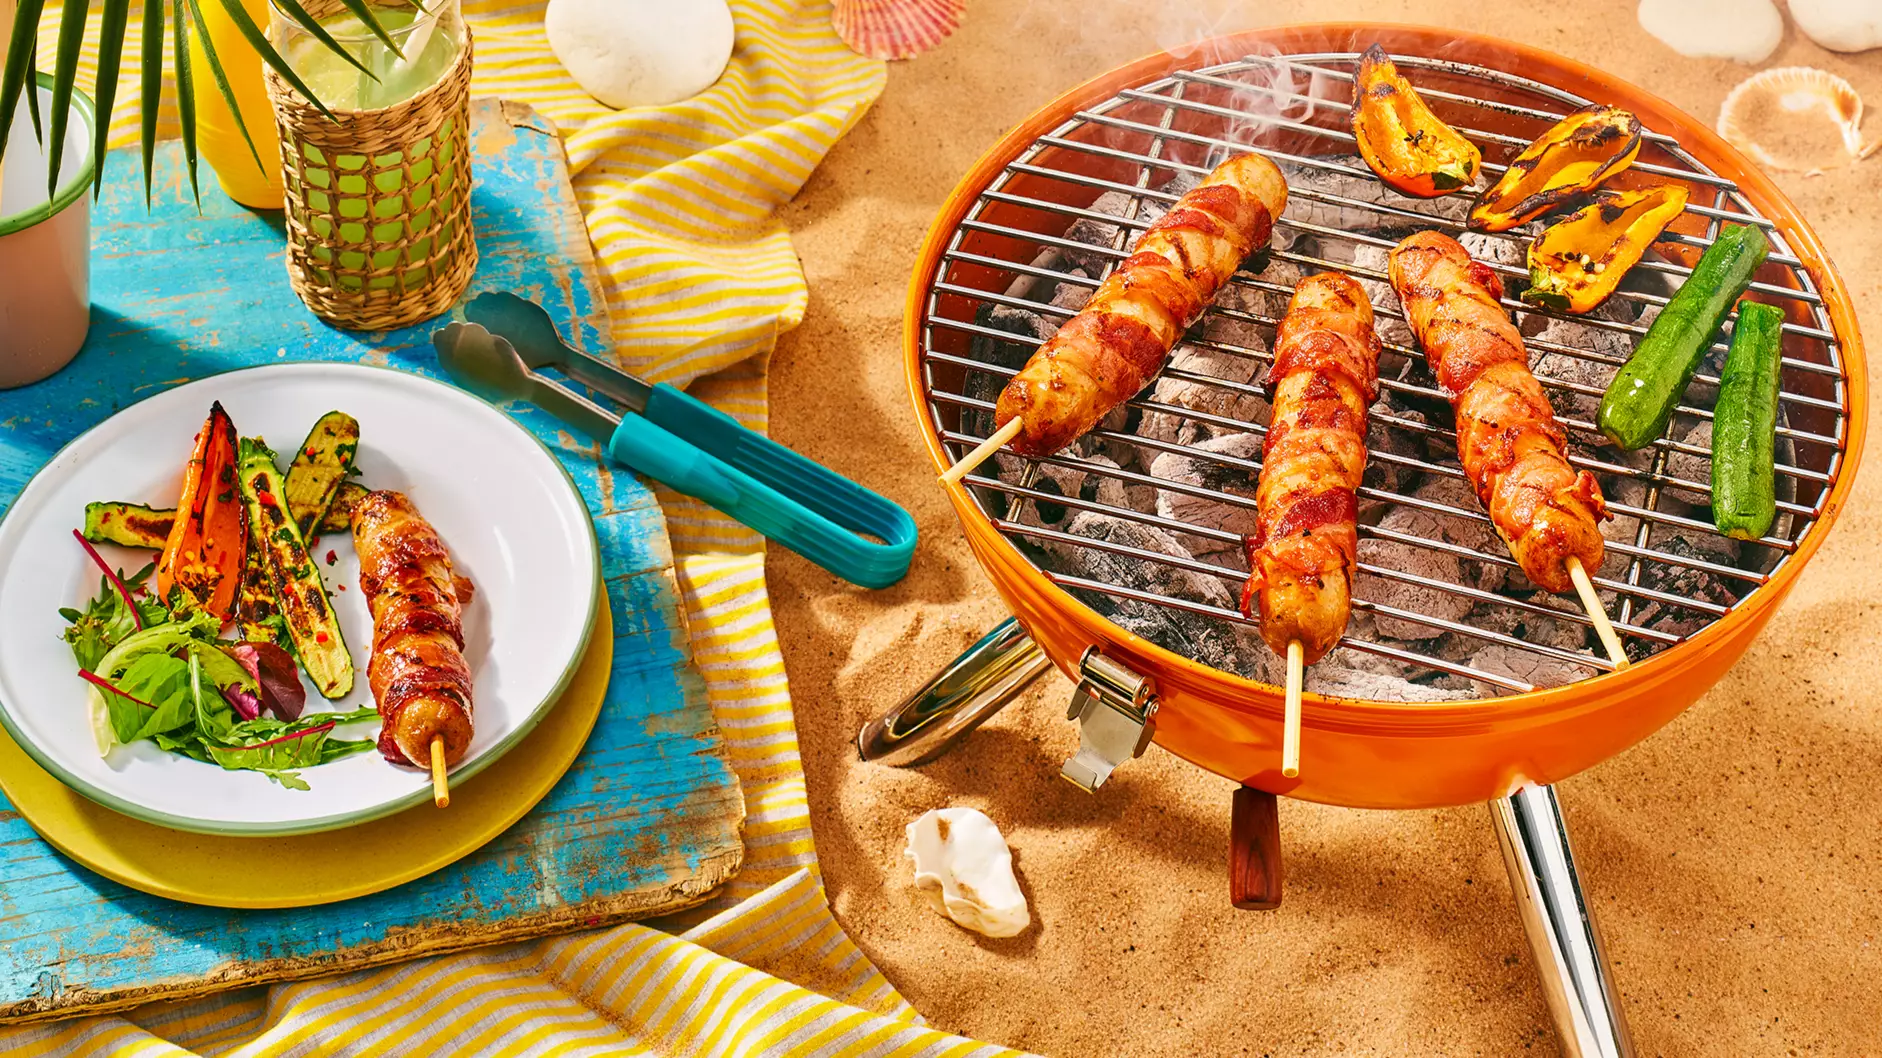 Sainsbury's Launches Jumbo 'Pigs In Beach Towels' For Summer And We're Here For It